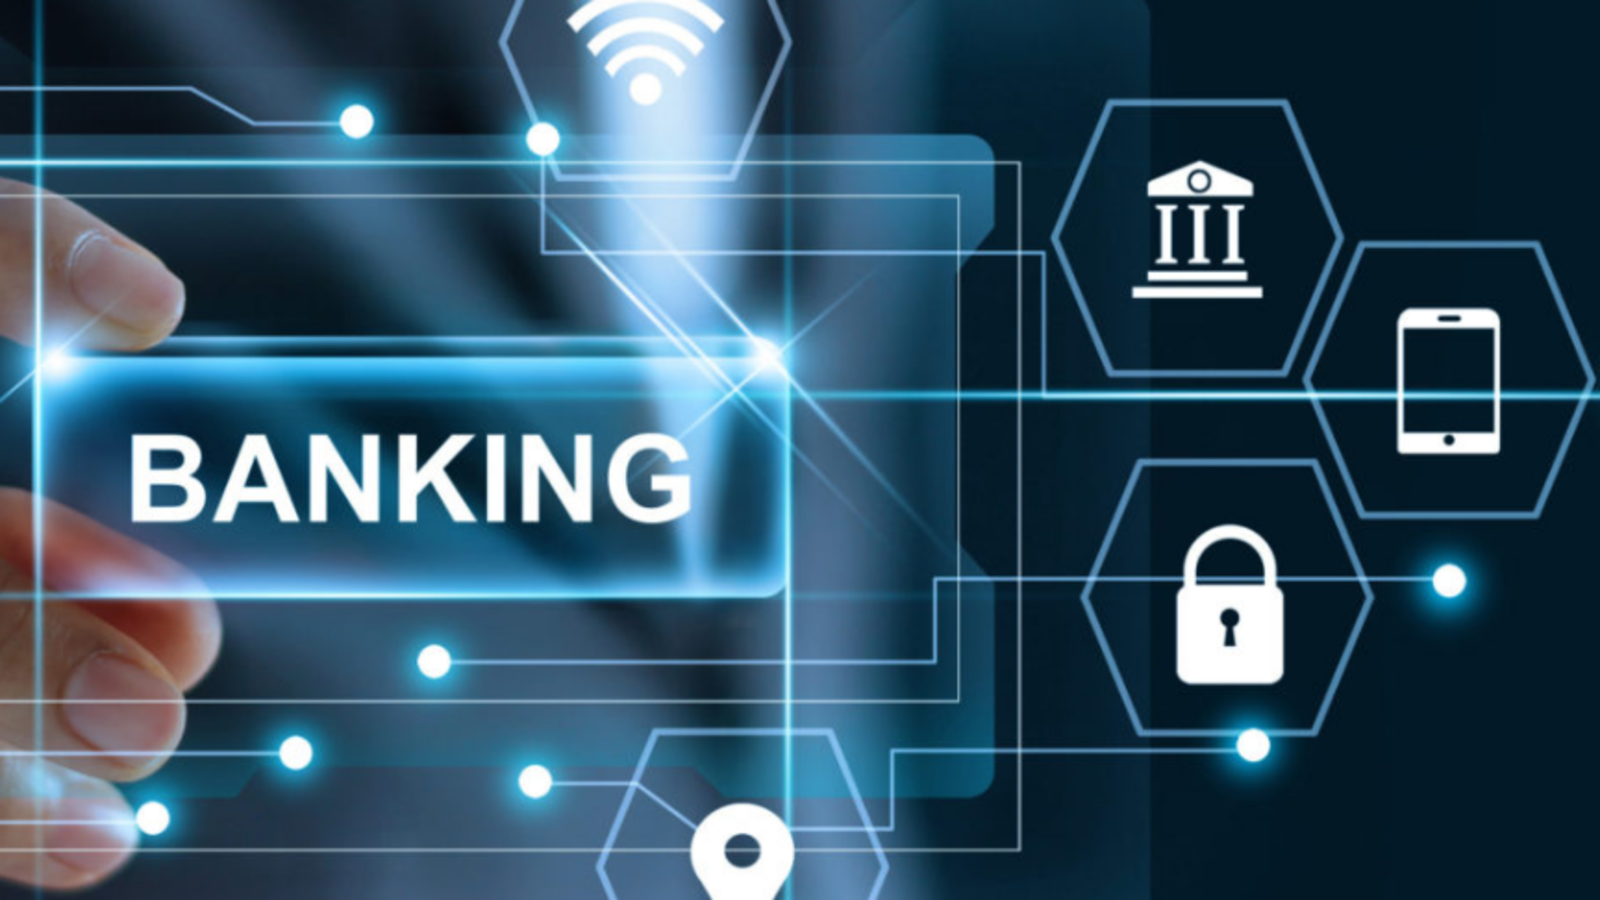 Artificial Intelligence and Machine Learning in Banking